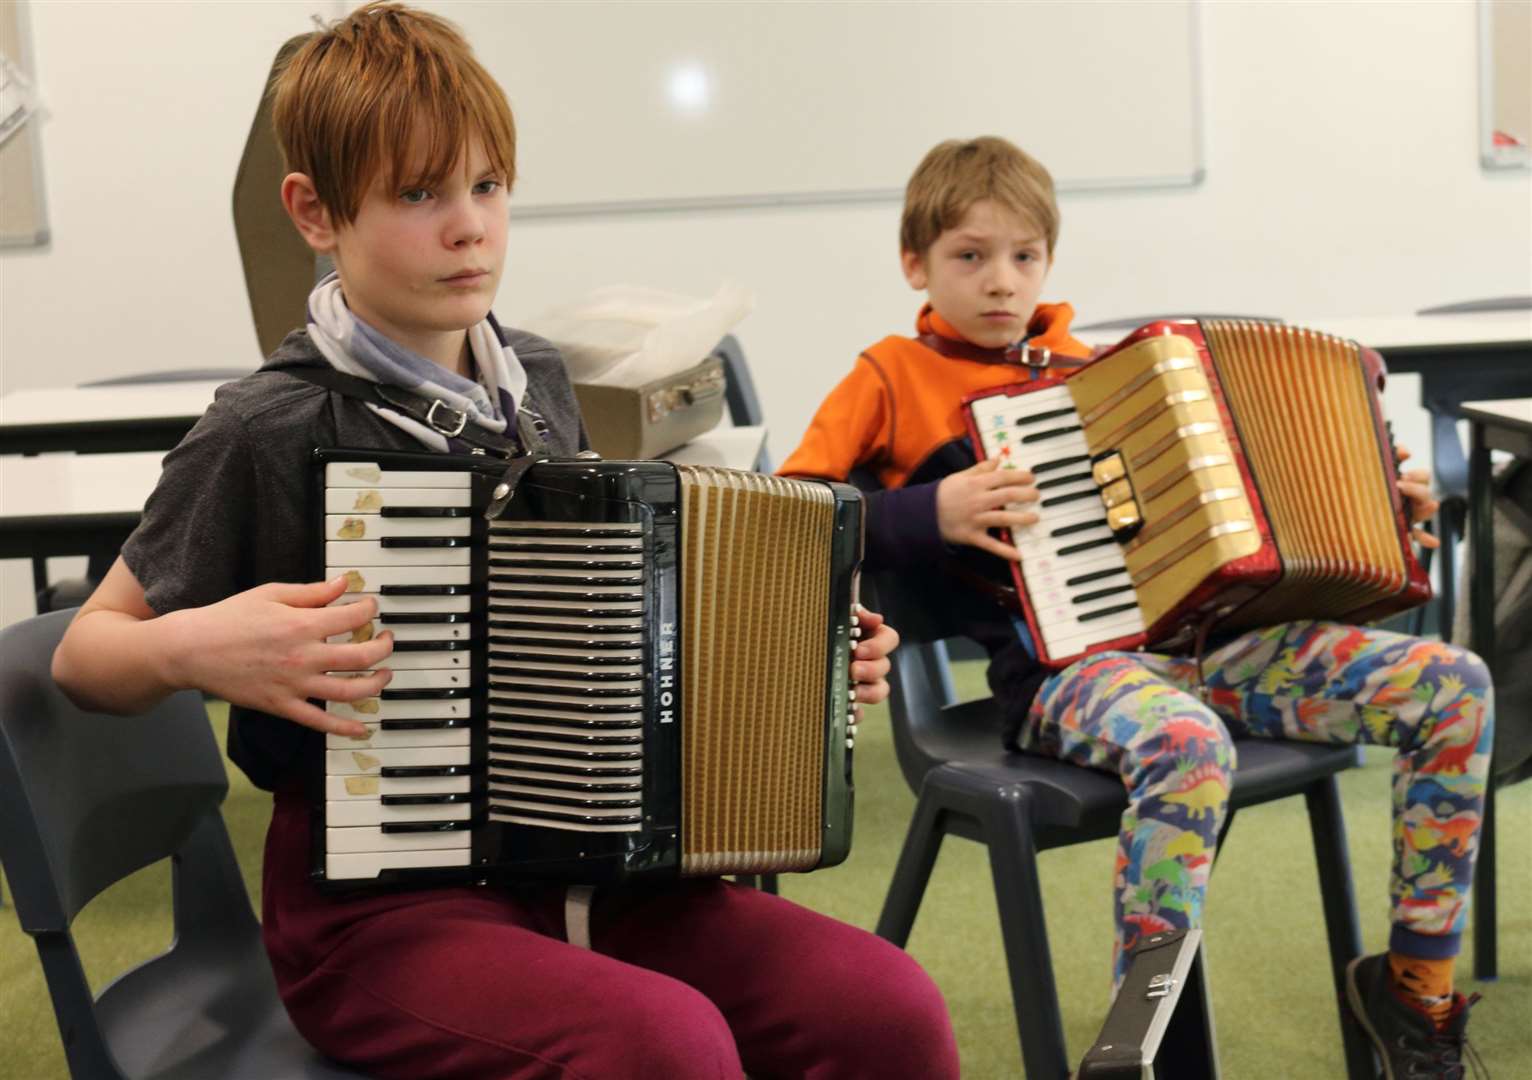 Accordion classes always see a lot of youngsters eager to learn to play.